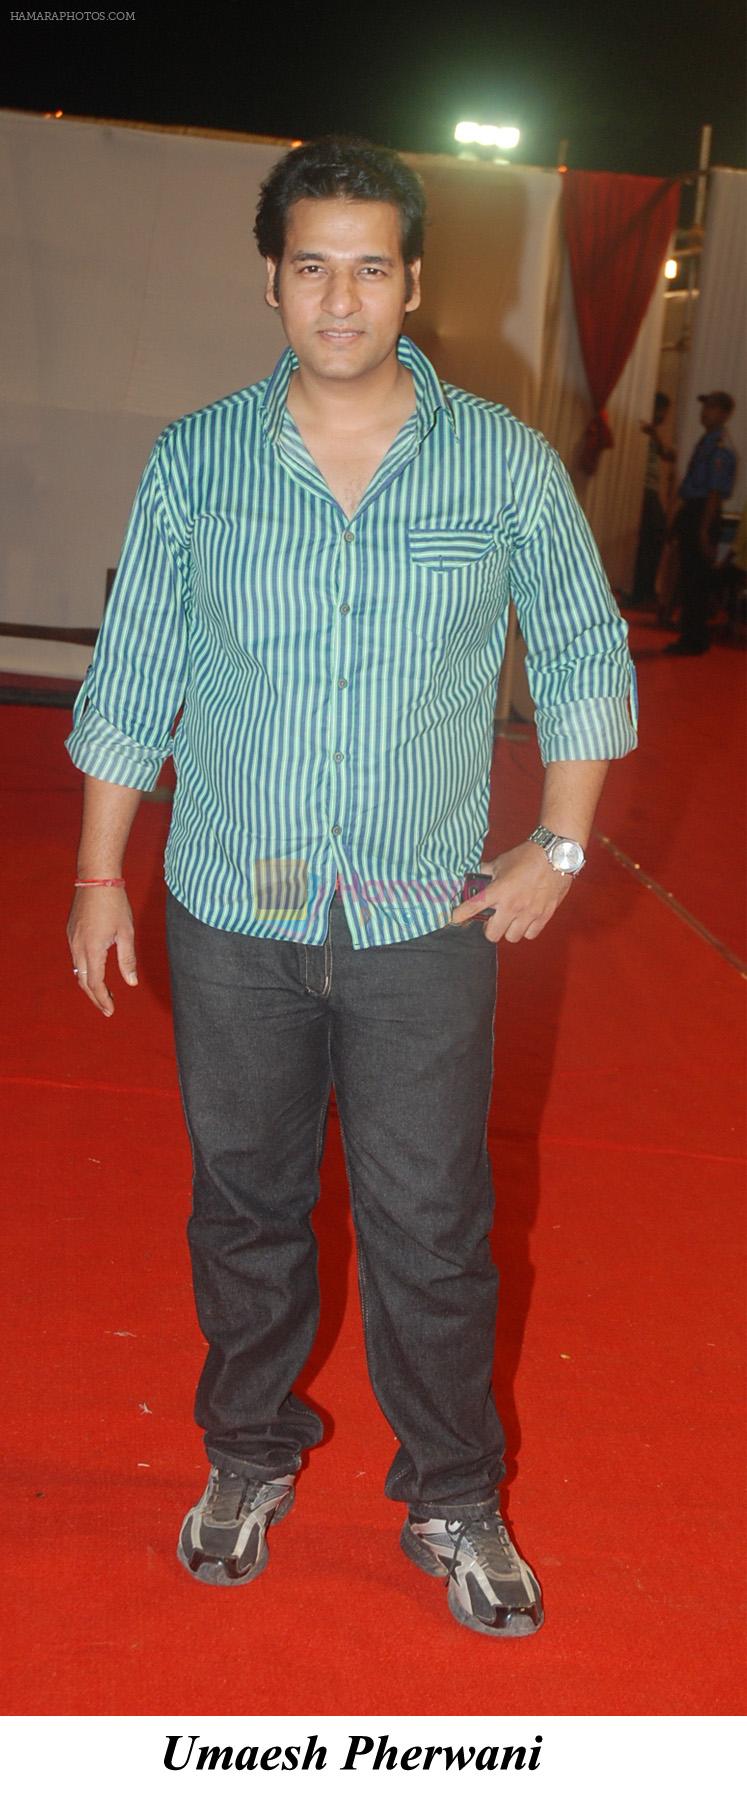 Umaesh Pherwani at the 63rd Annual Conference of Cardiological Society of India in NCPA complex, Mumbai on 9th Dec 2011